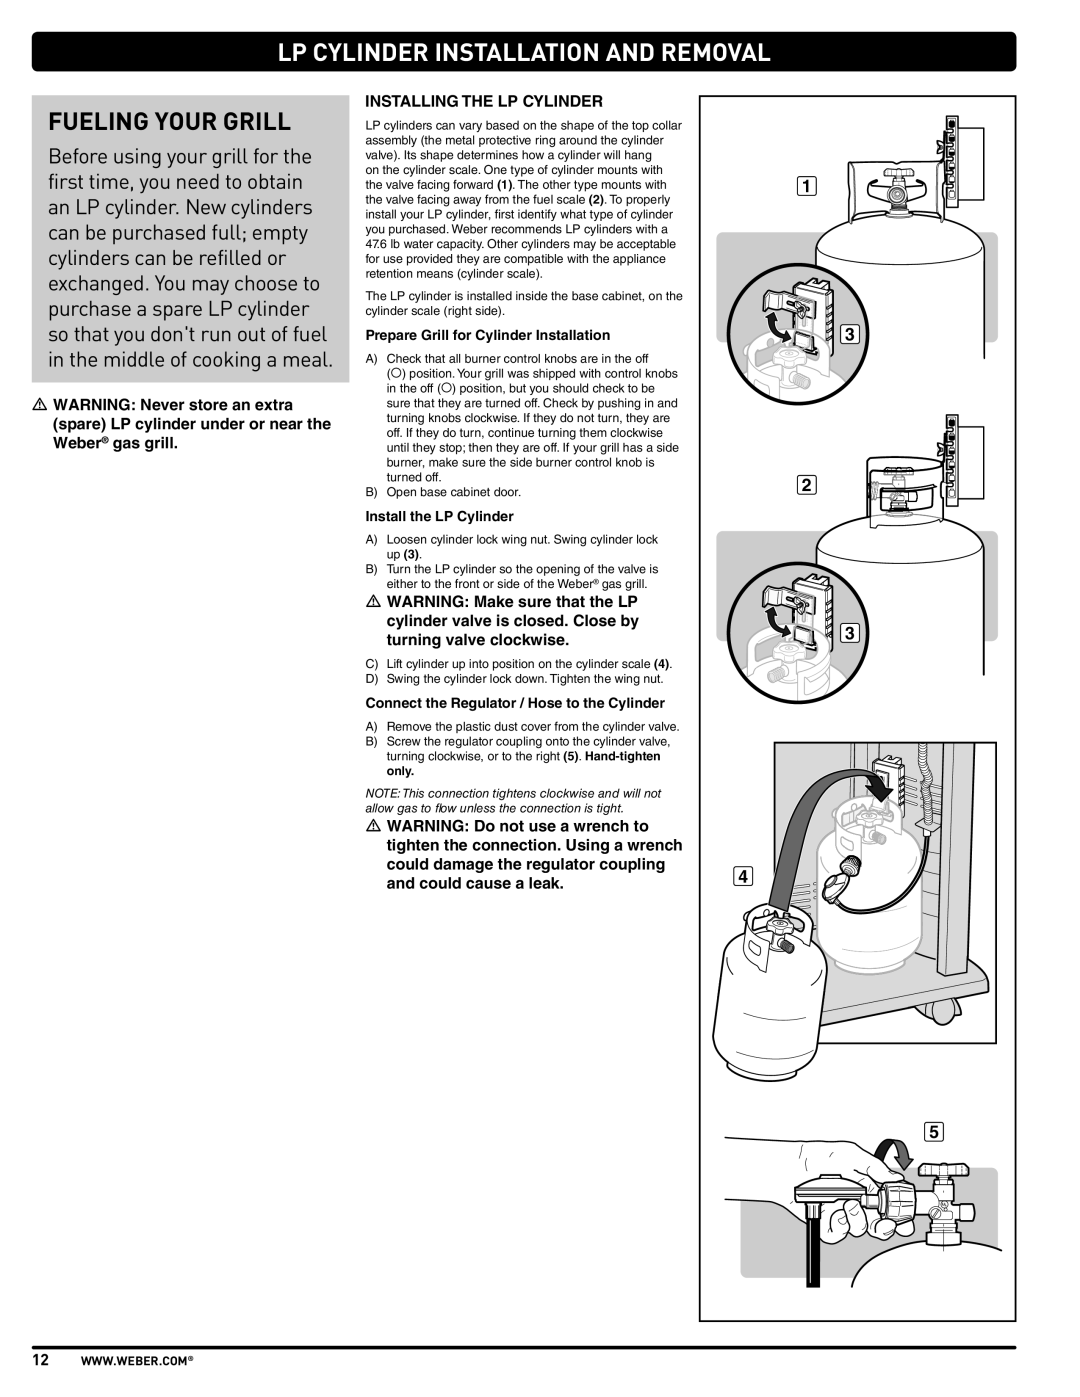 Weber PL - PG. 59 57205 Lp Cylinder Installation And Removal, Fueling Your Grill, Prepare Grill for Cylinder Installation 